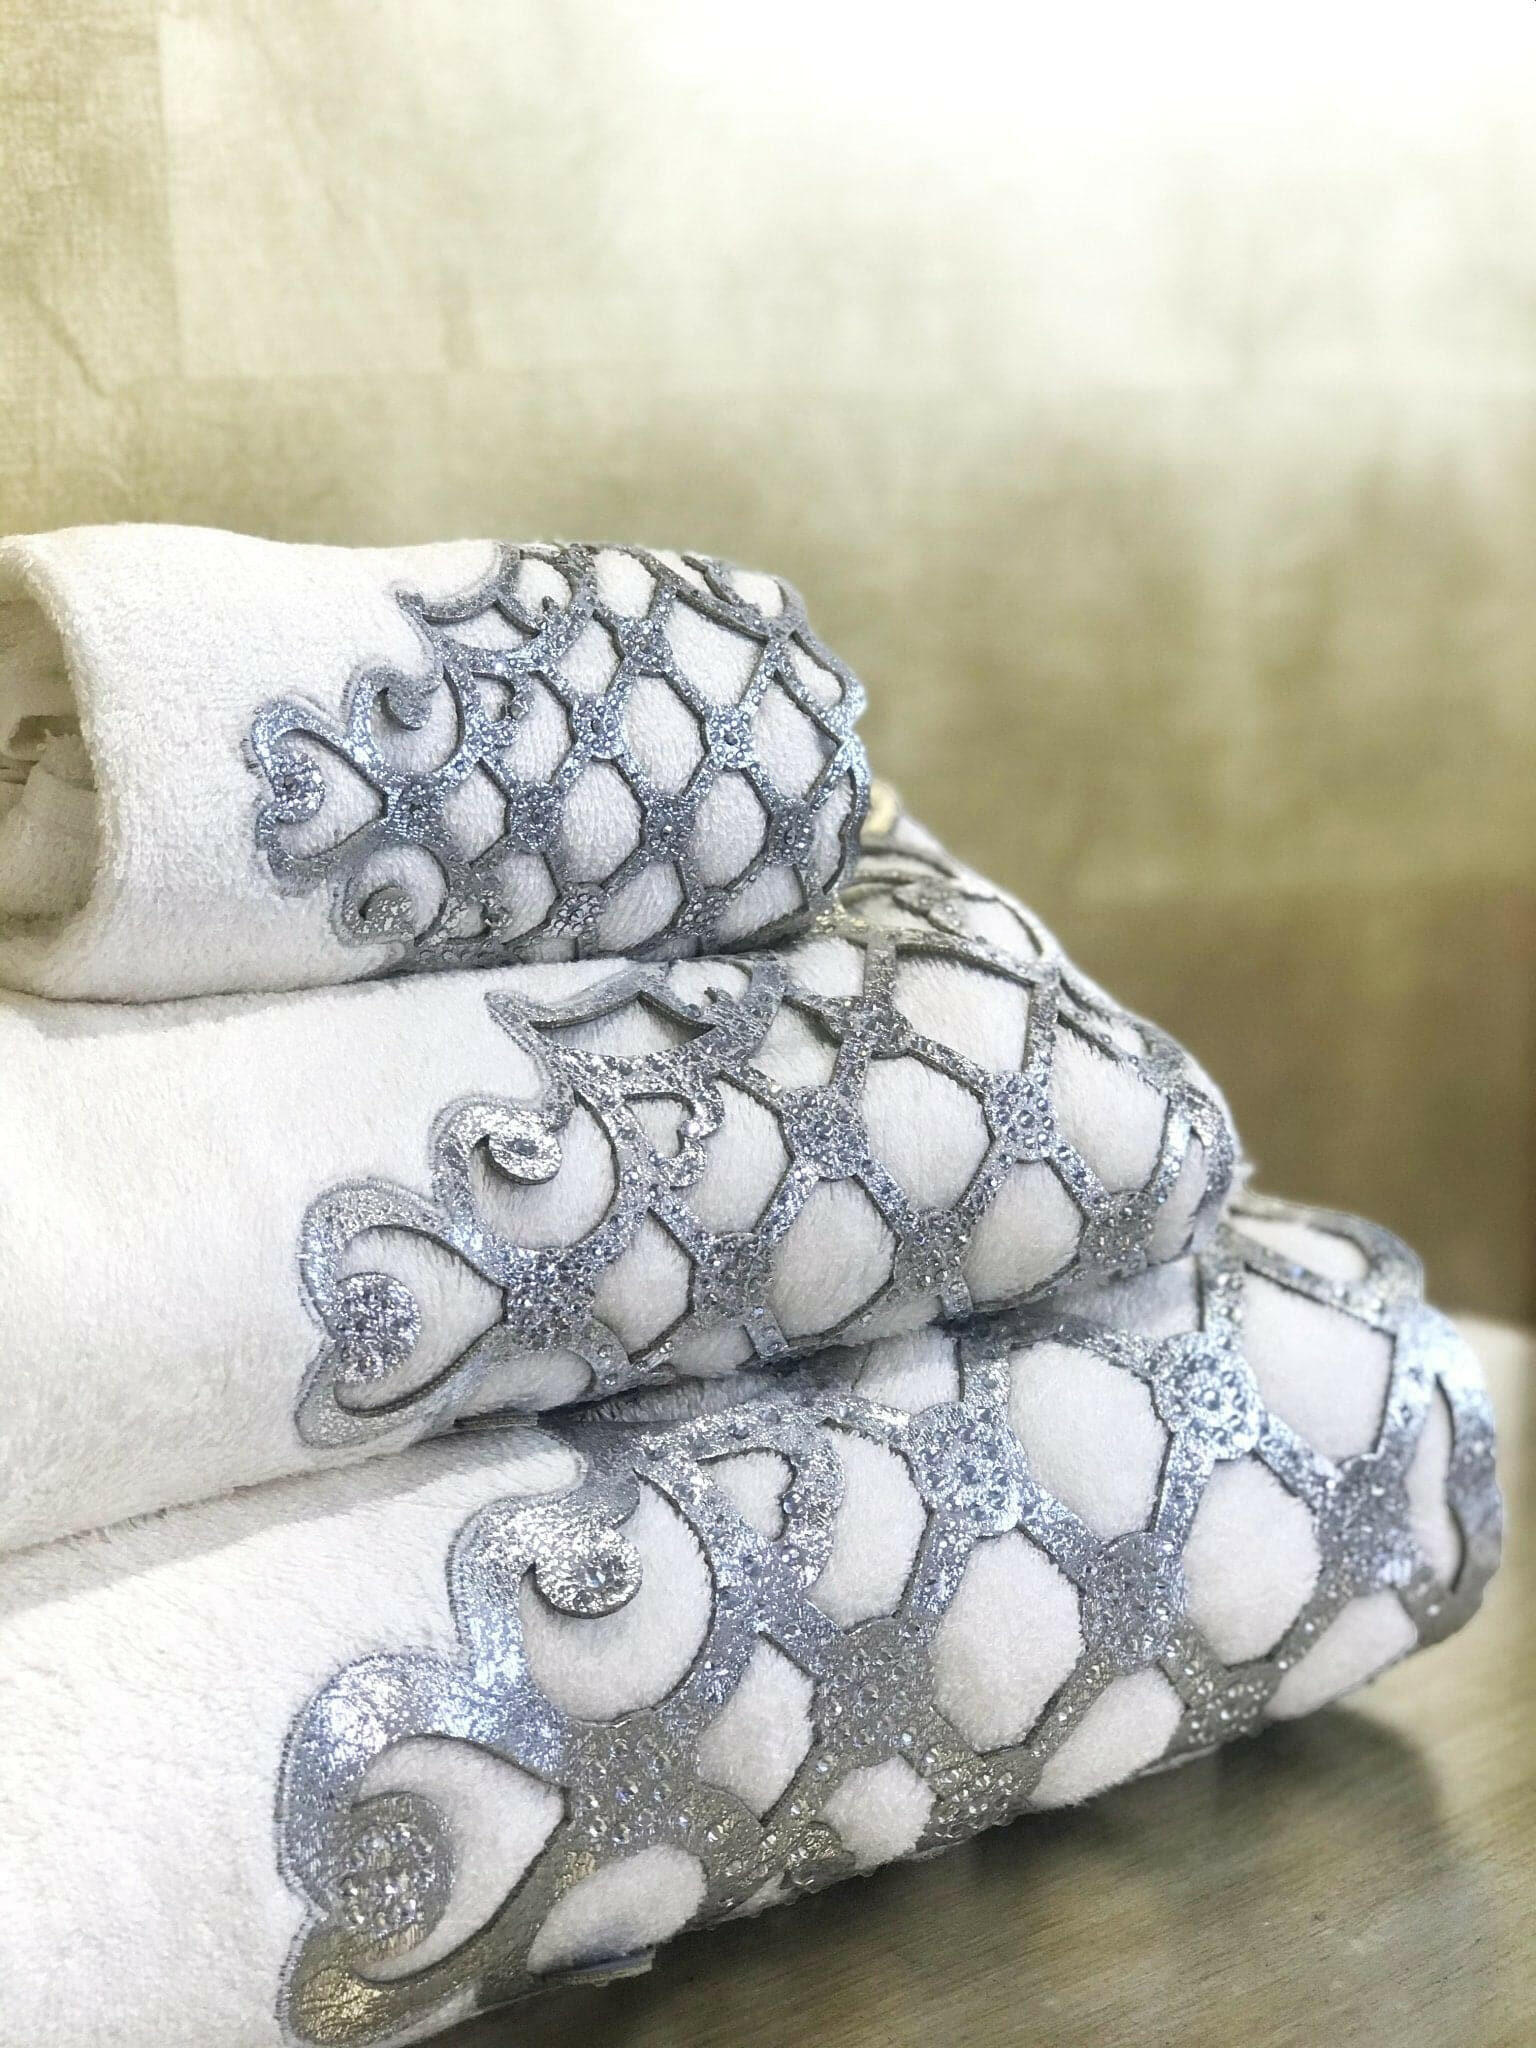 Mihrace Silver Towel Set - Creative Home Designs, Cut Through Grey Silver Leather Velvet Luxury Cream Turkish Oriental Towel with Velvet and Diamonds,TS-CH-MHRC-Si